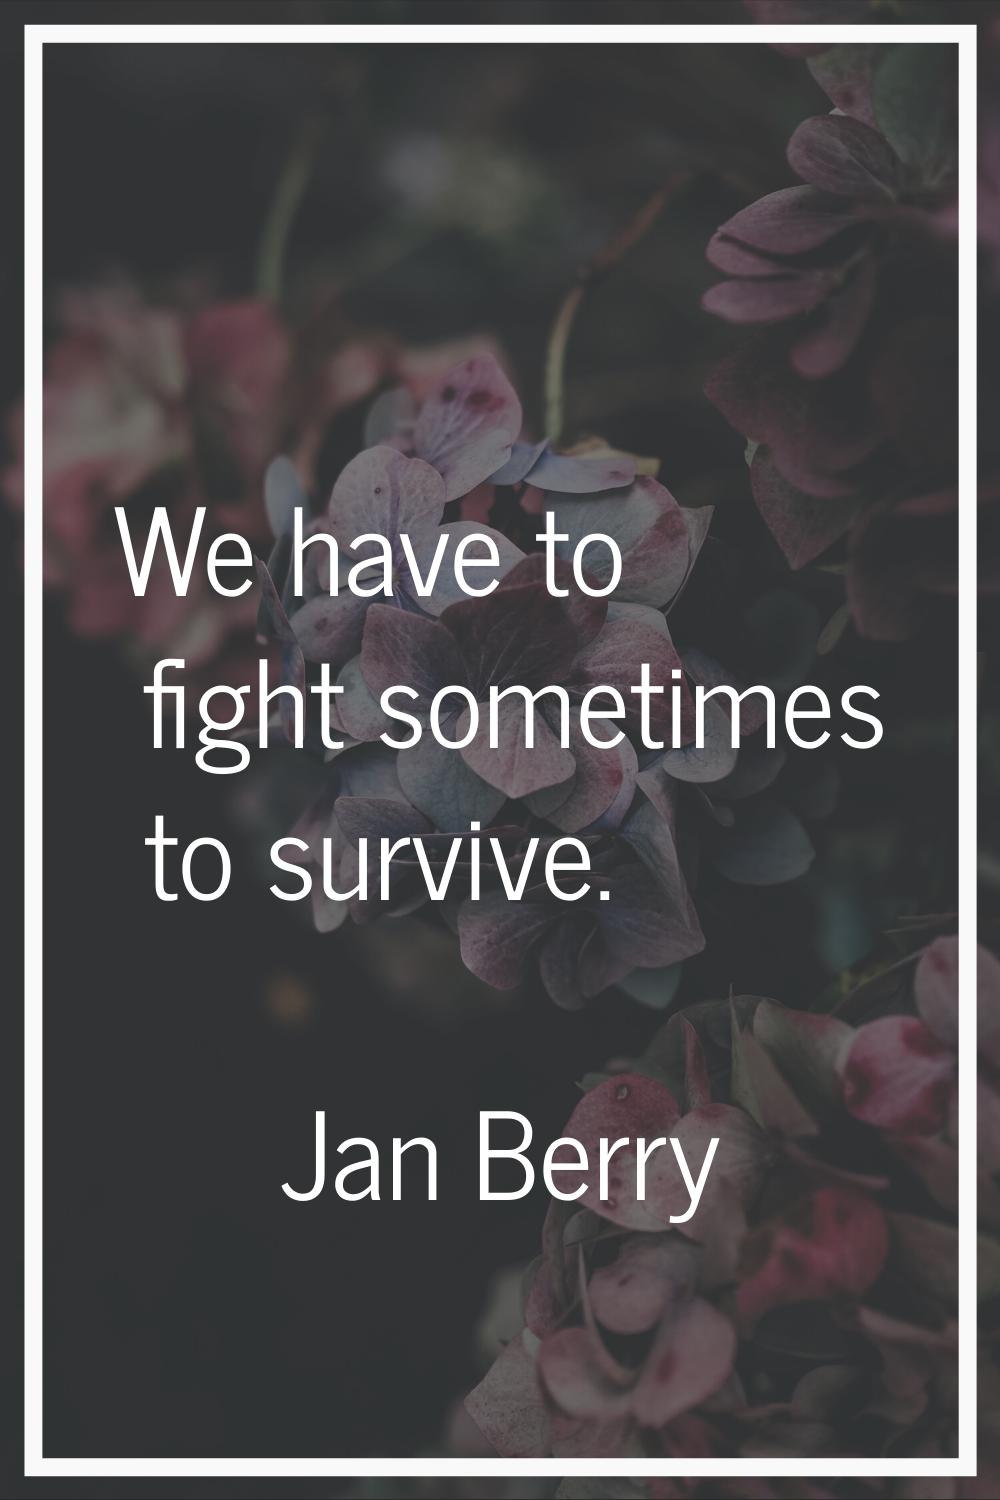 We have to fight sometimes to survive.